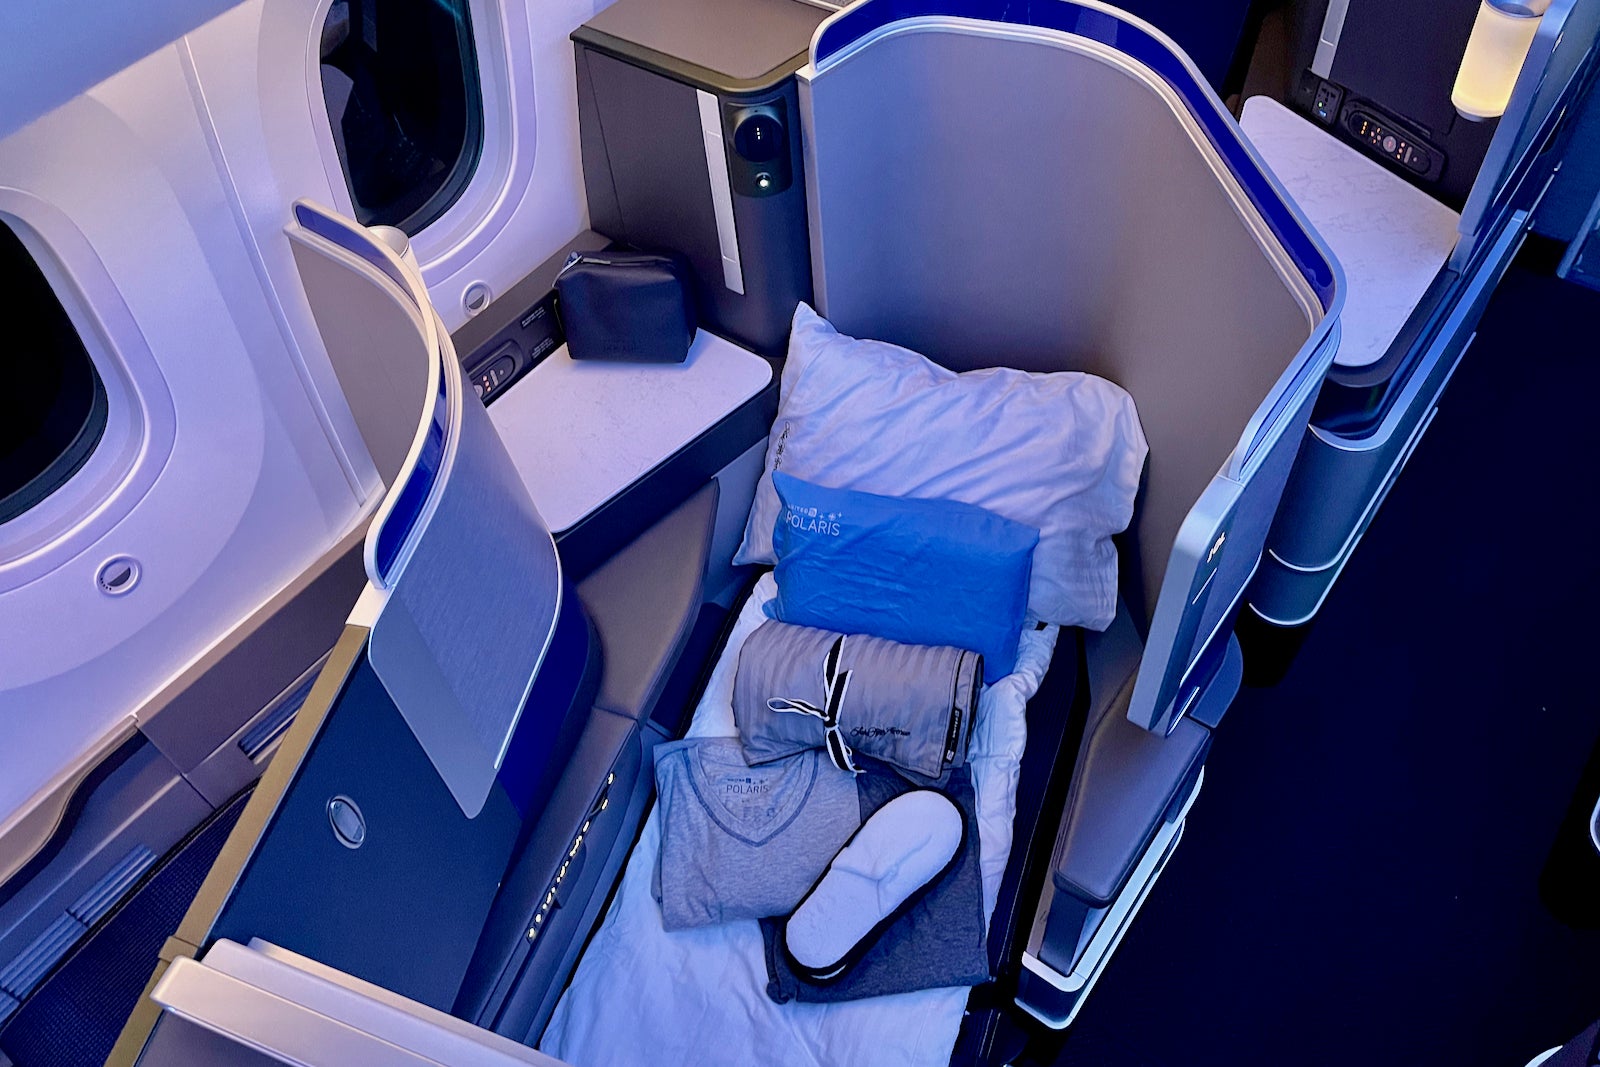 a business class seat in the lie-flat position with amenities on top of the bedding